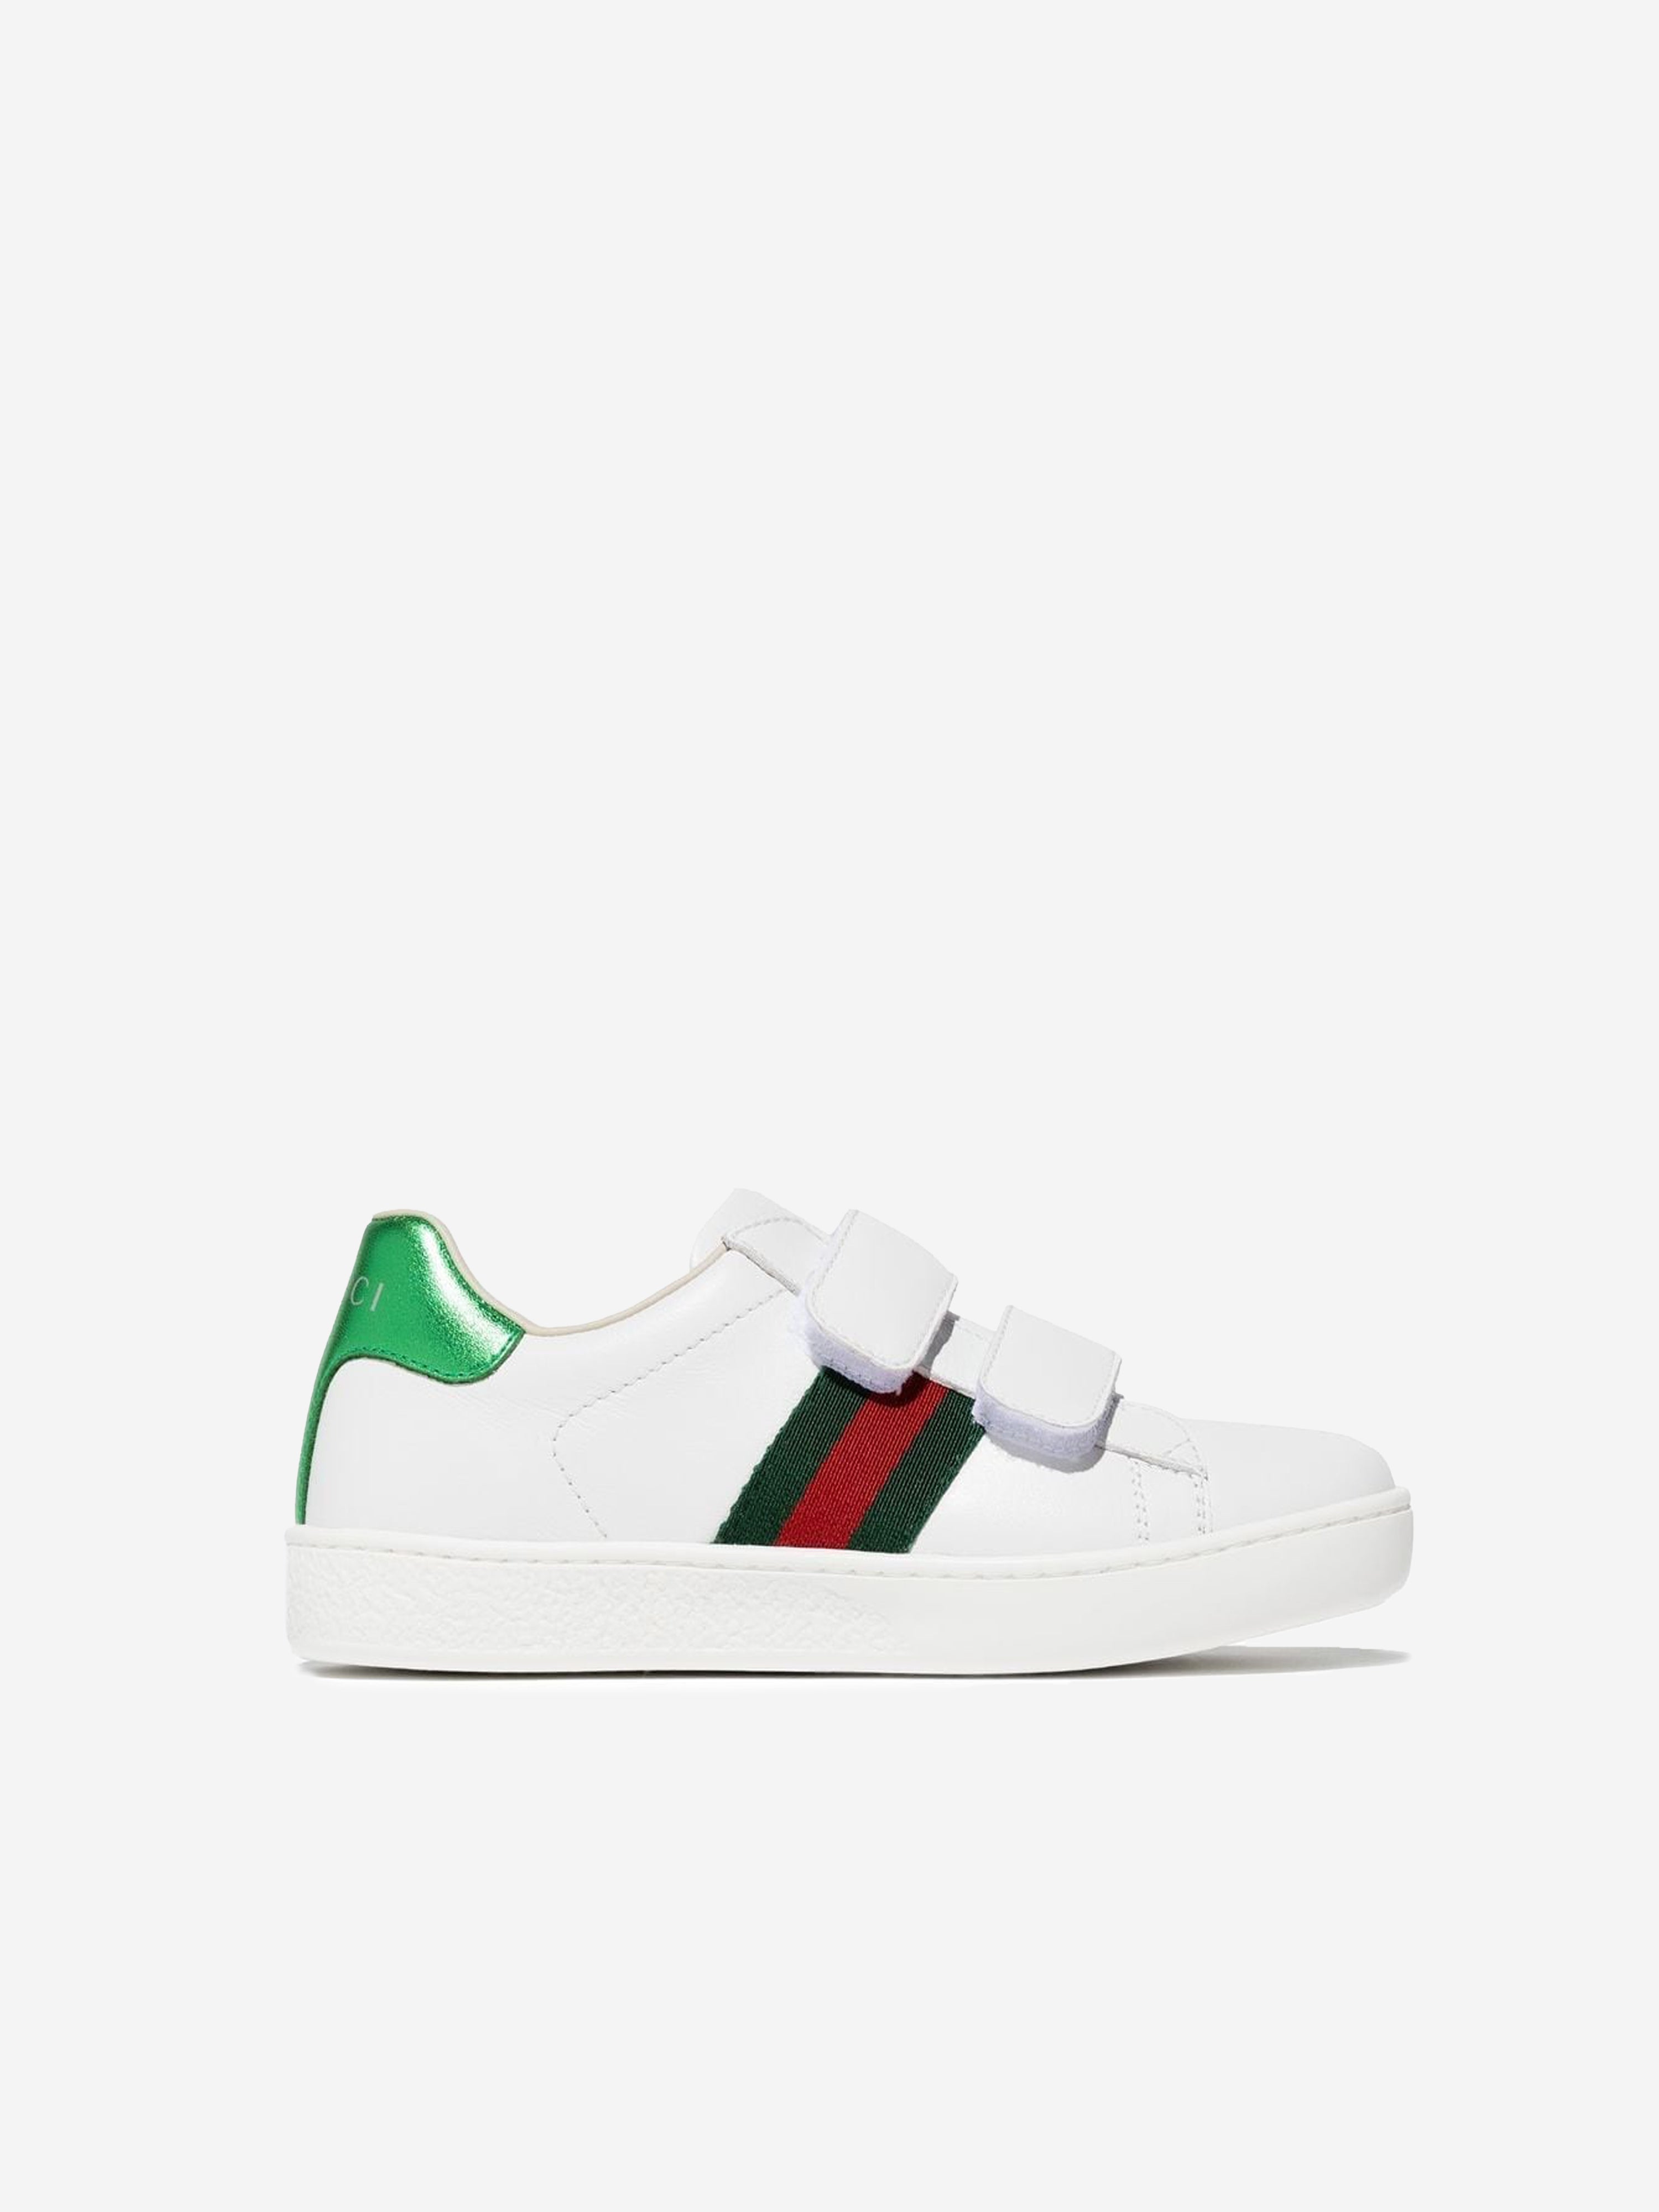 Gucci Kids GUCCI Leather Trainers With Stripe | Childsplay Clothing